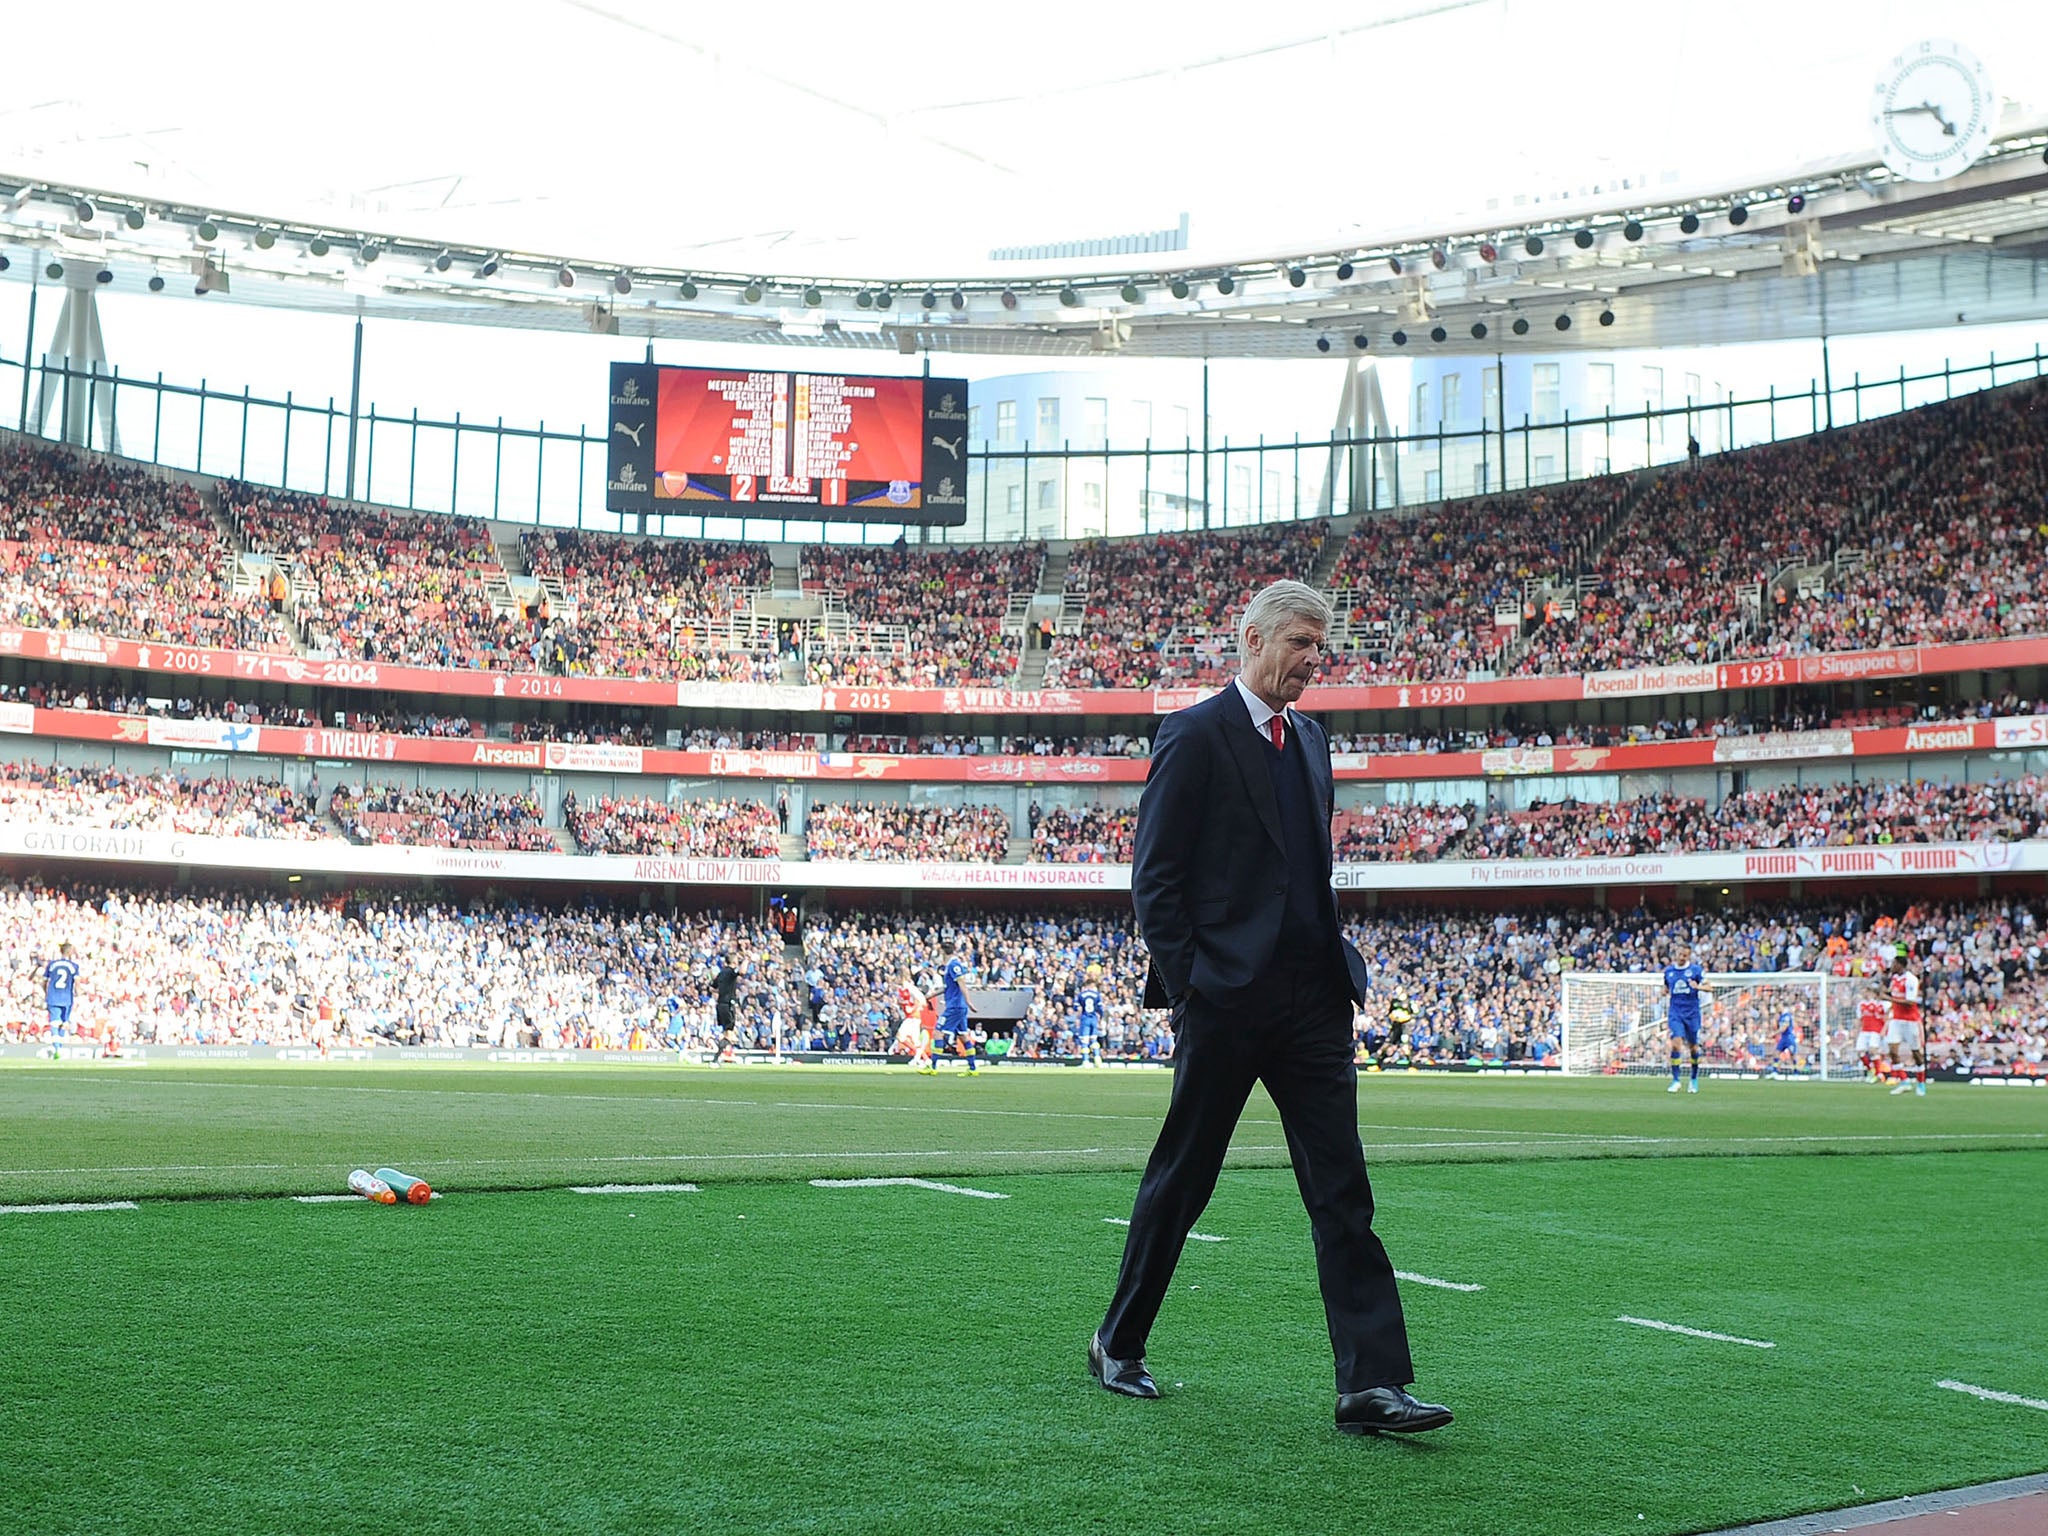 Wenger is still yet to commit his future to Arsenal